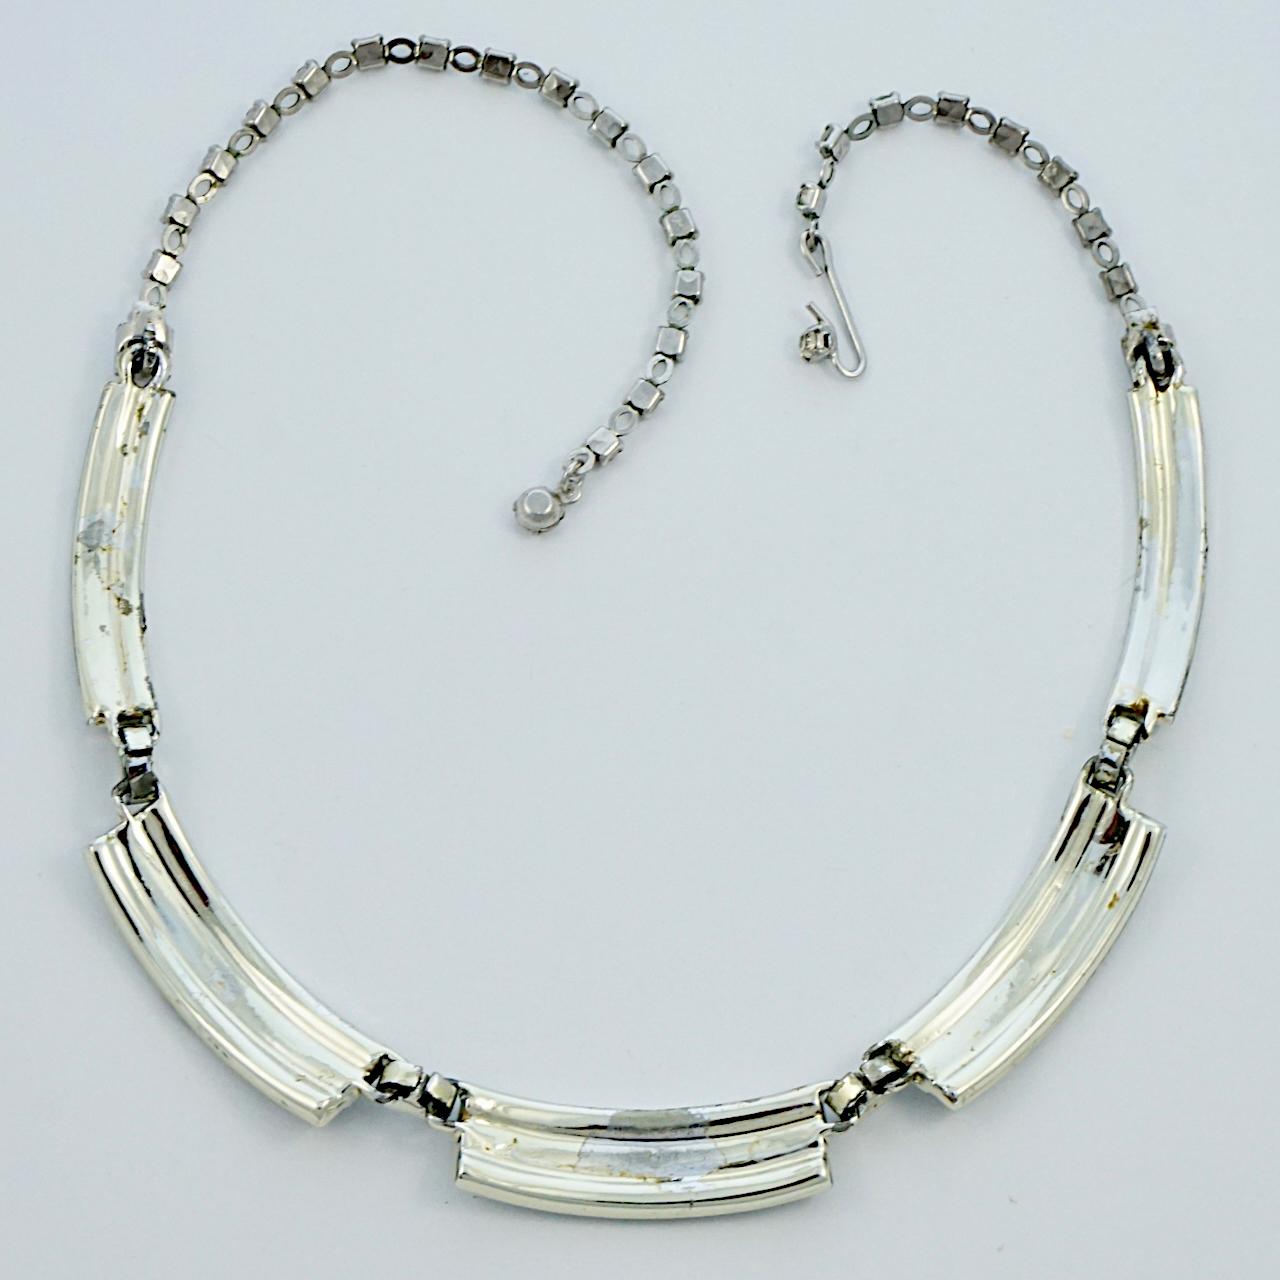 Silver Plated Bar Link Rhinestone Necklace circa 1950s For Sale 3